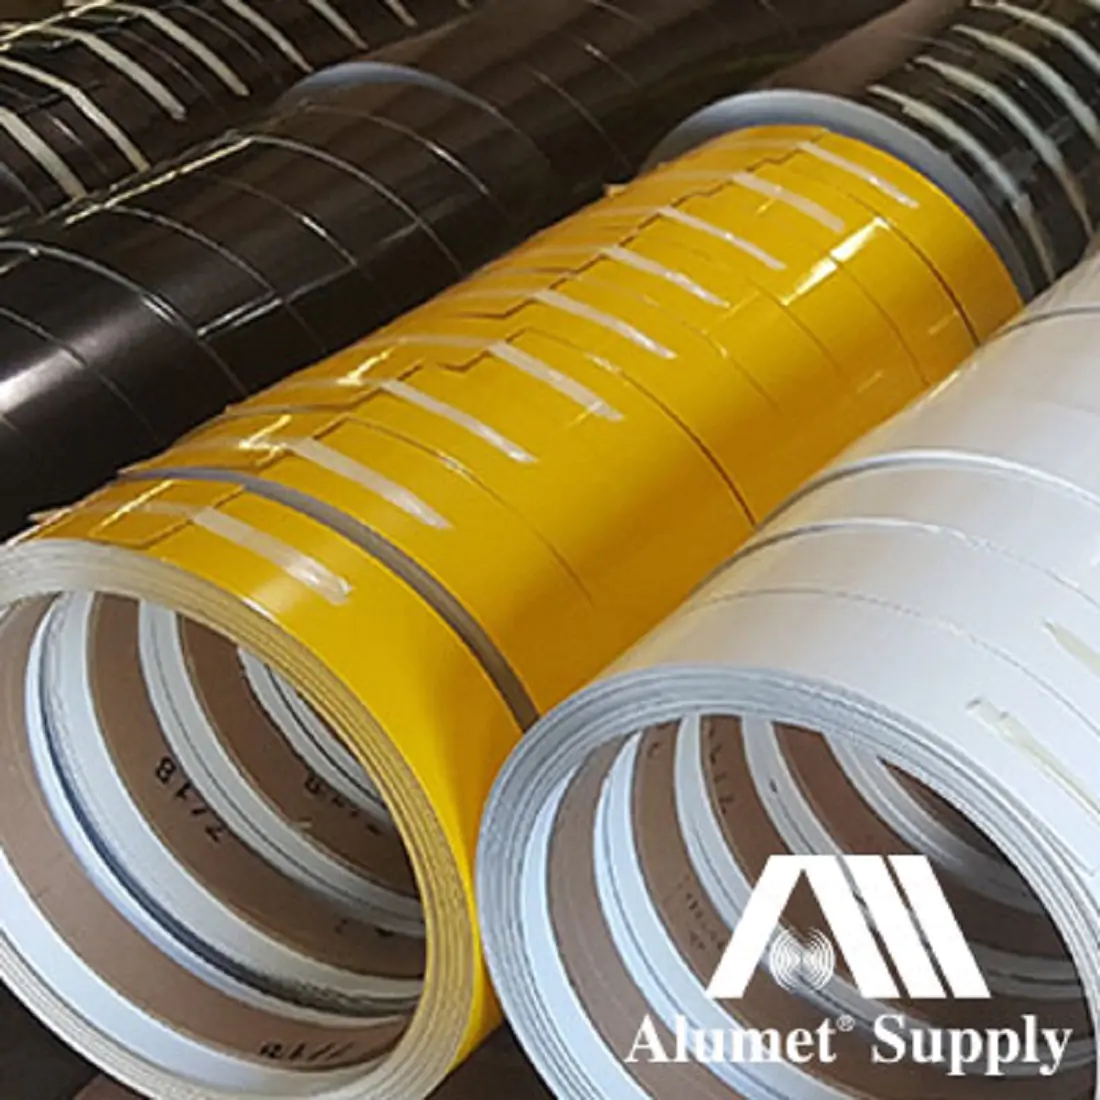 Black, yellow and white Alumet Aluminum Channel Coils.
